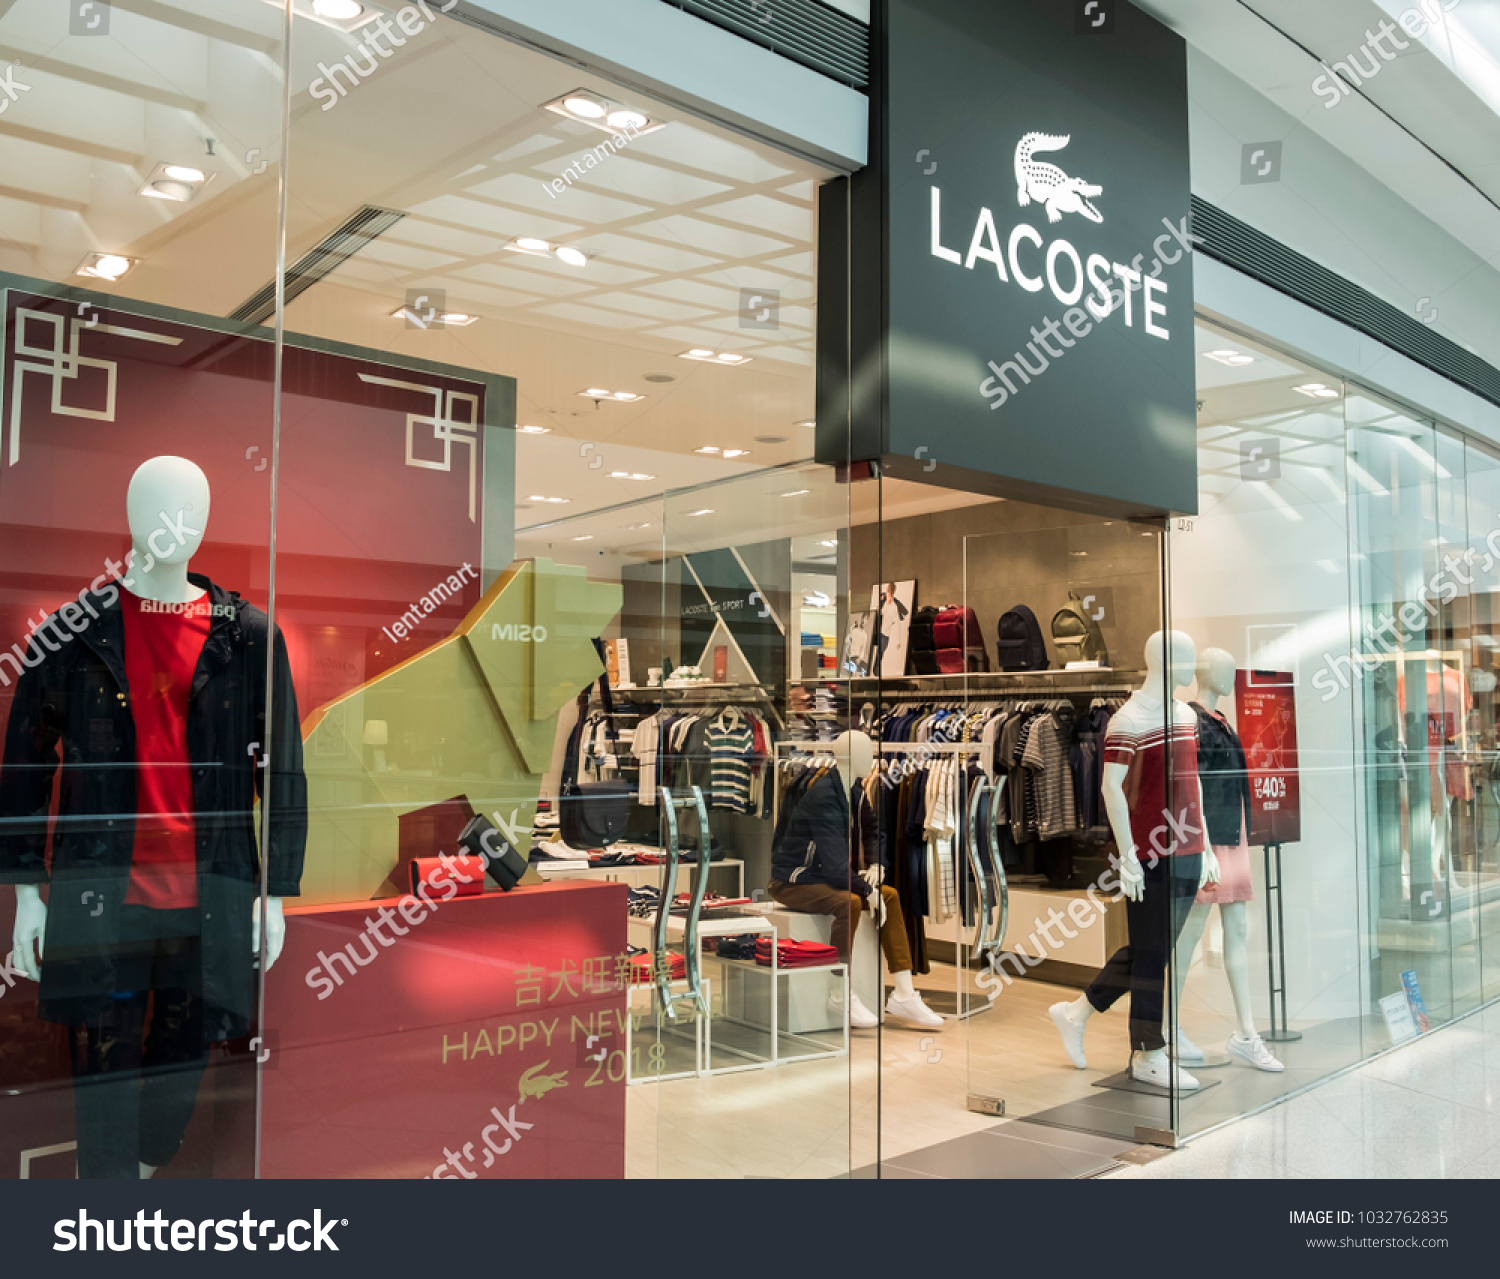 lacoste outlet near me